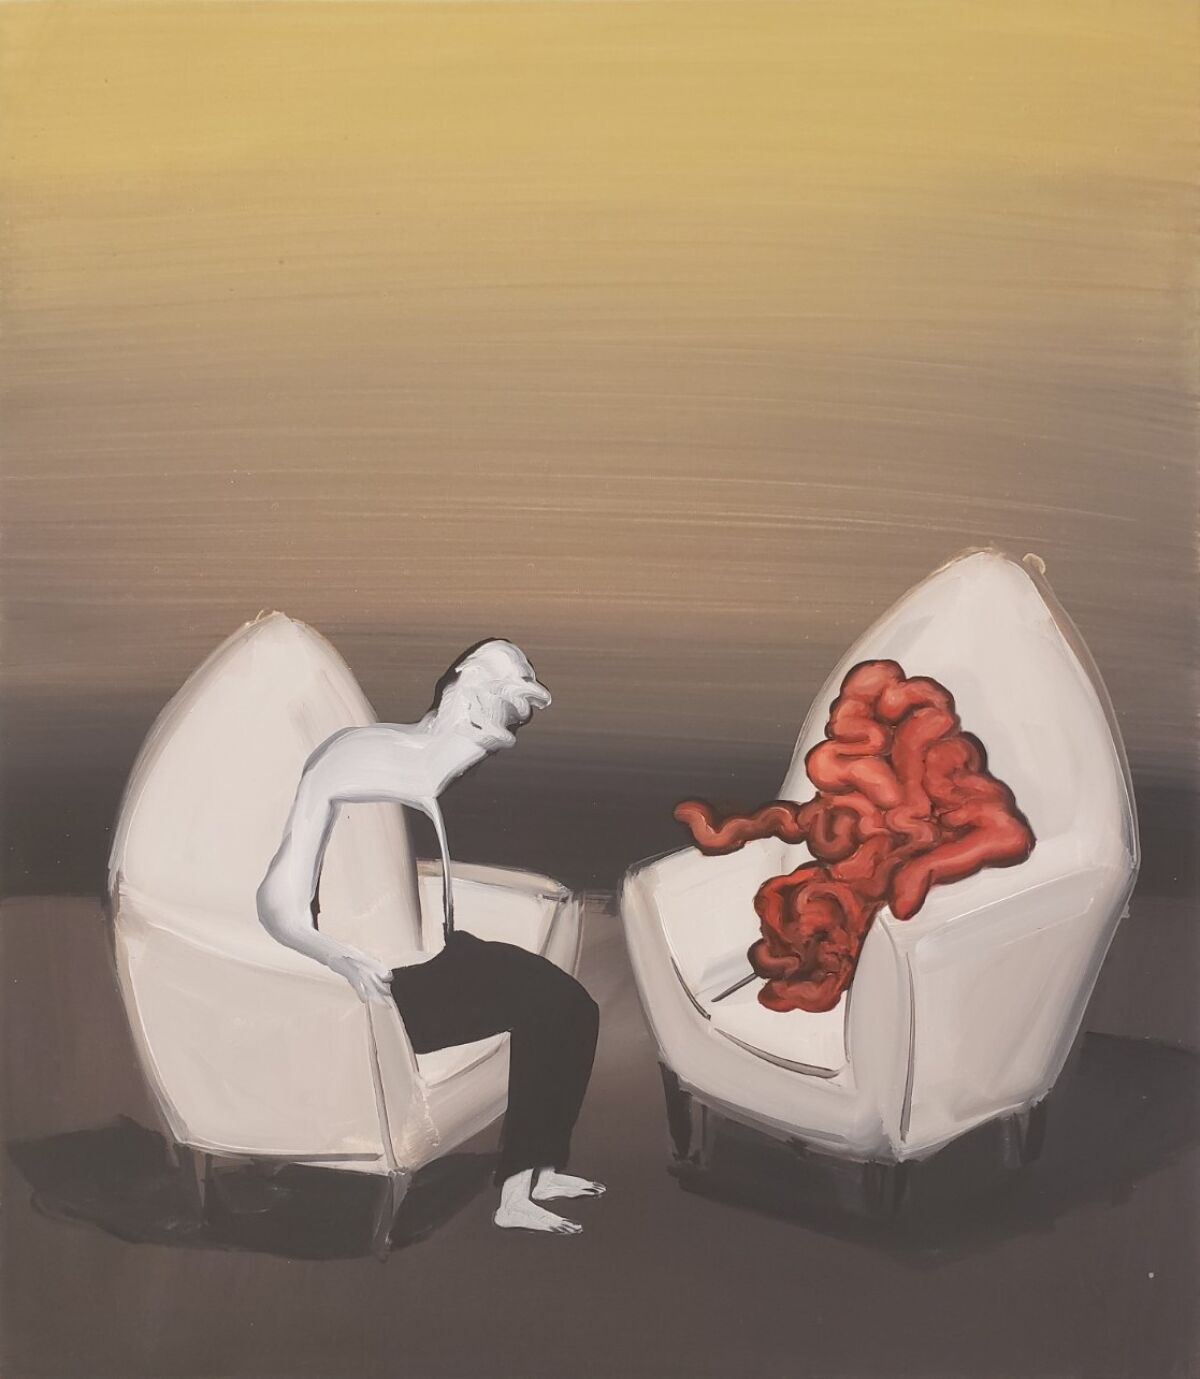 A painting of a male figure, missing much of his torso, in a chair chatting with intestines, also in a chair.